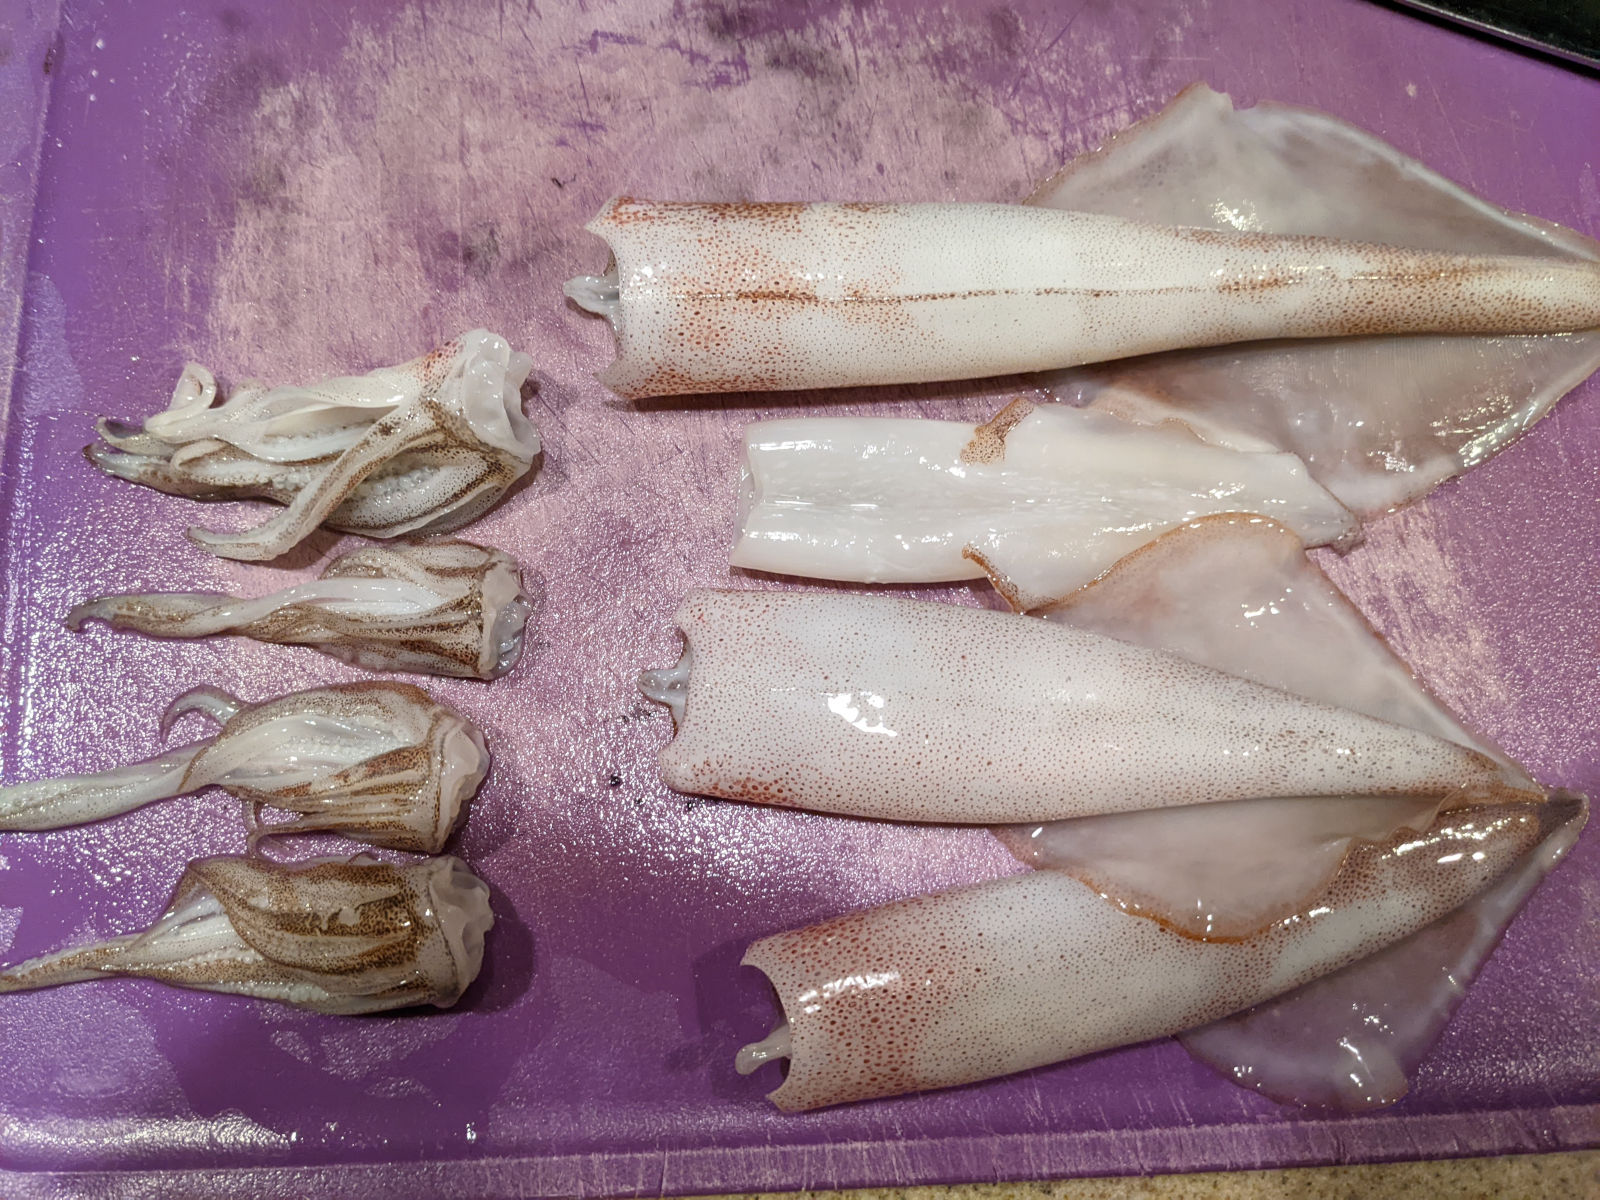 Four cleaned squid on the cutting board